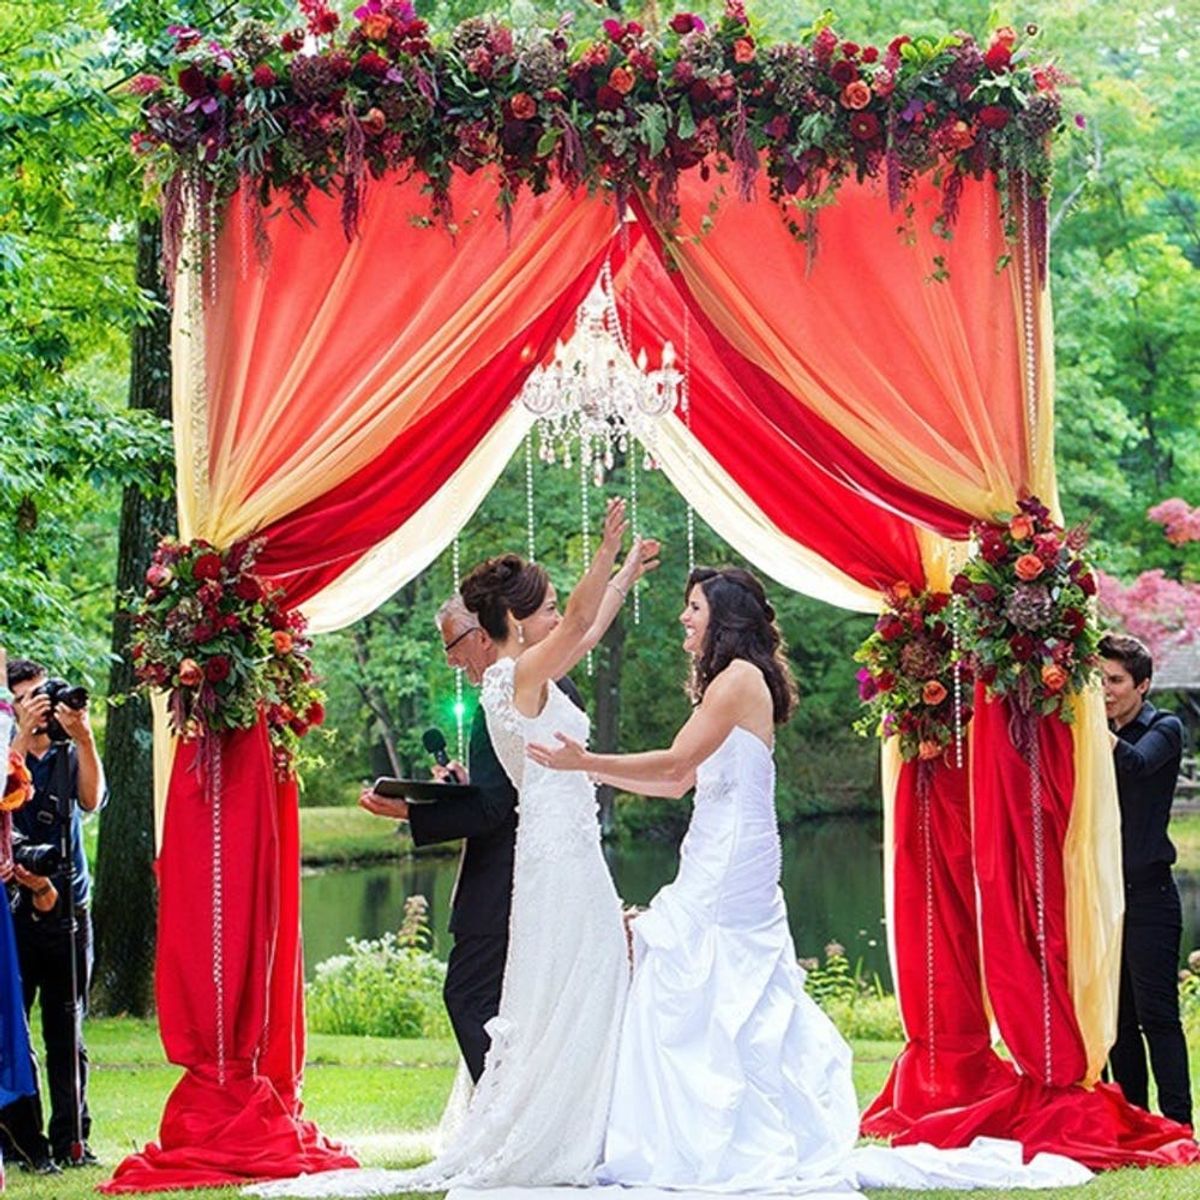 15 Creative Wedding Canopies Perfect for Your Big Day